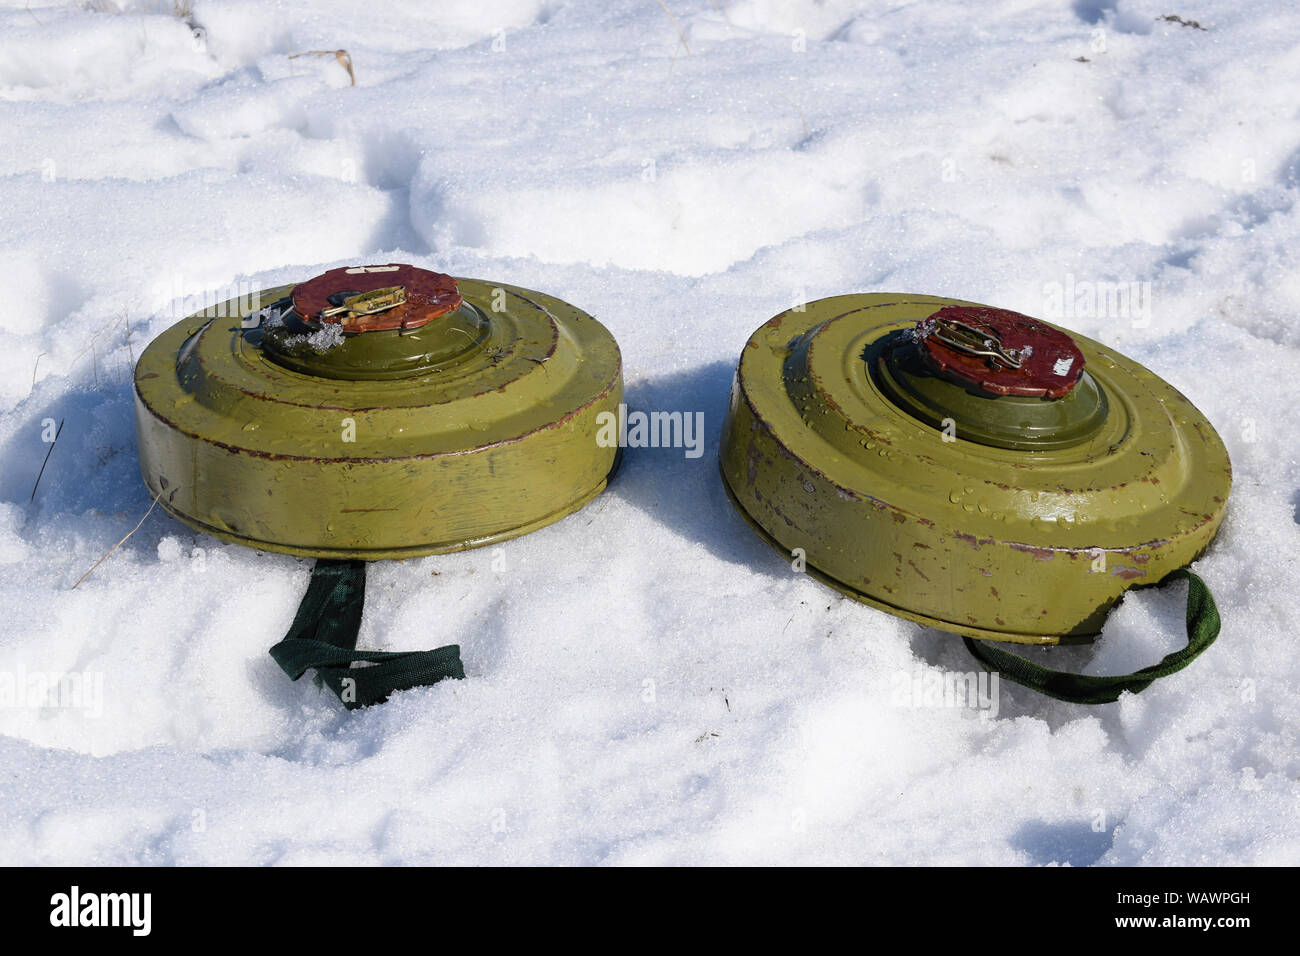 Anti-tank land mines on the snow fully armed and ready to be installed on the battlefield Stock Photo